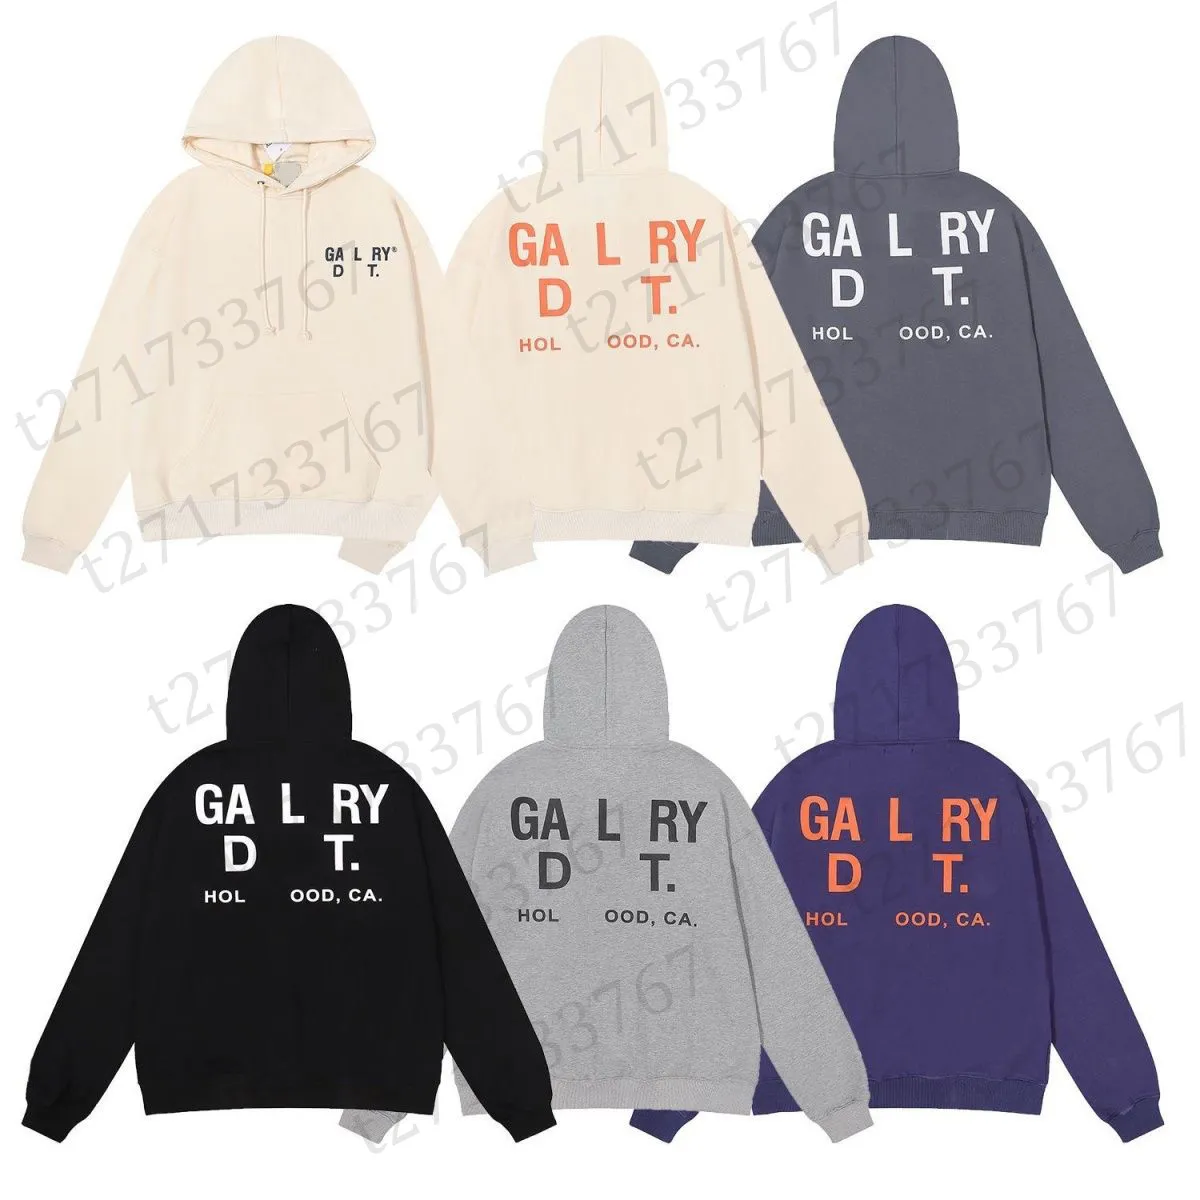 American brand Mens Women Hoodies Designer Correct Letter Graphic Hip Hop Oversized Street Luxury Long Sleeved Clothes Tops Hoodys Pullover Sweatshirts T555